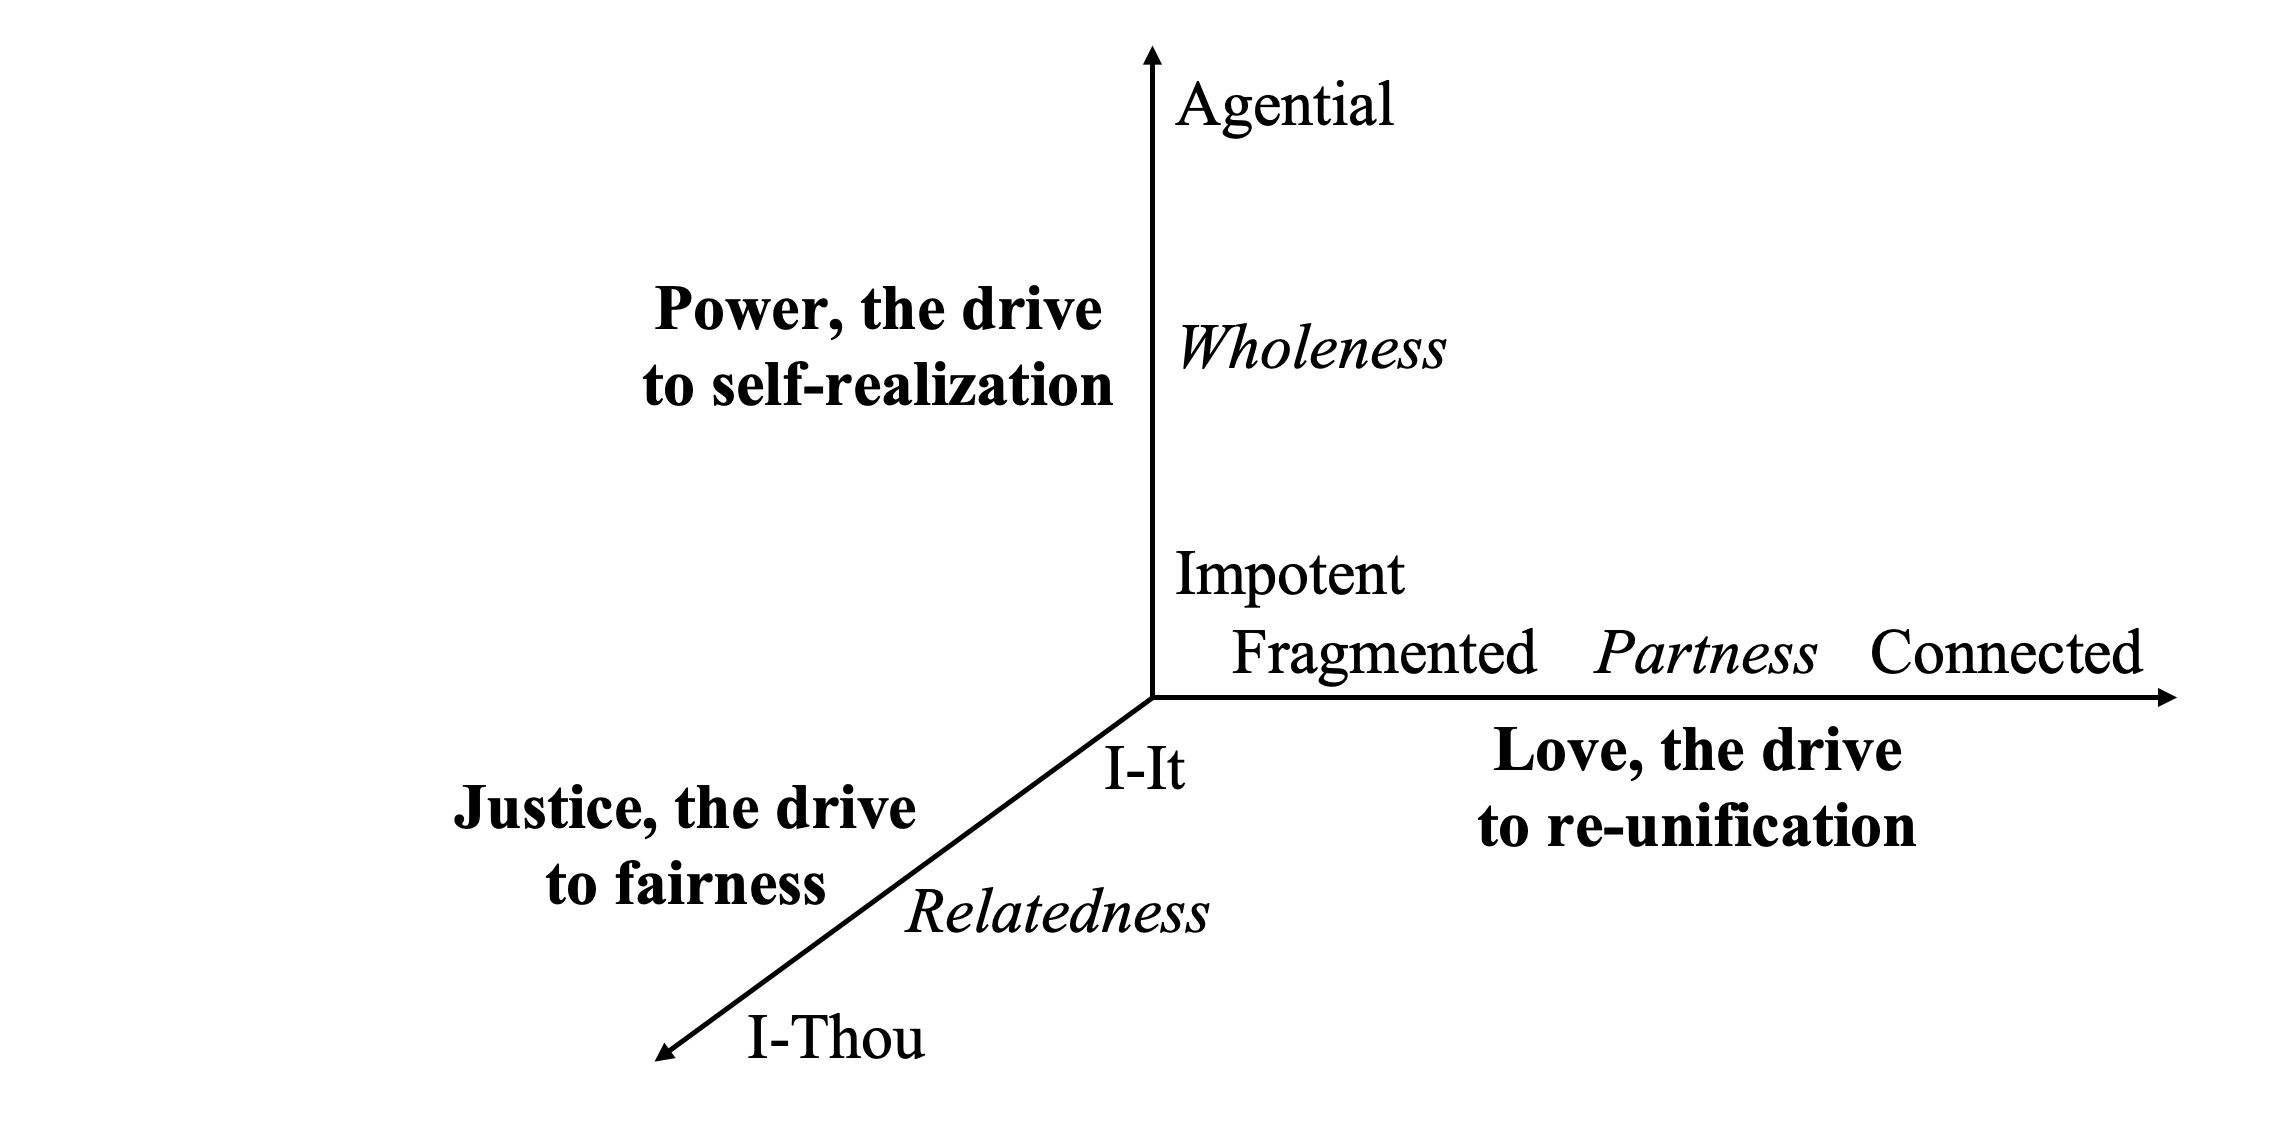 A theory of social transformation - the drives of love, power, and justice